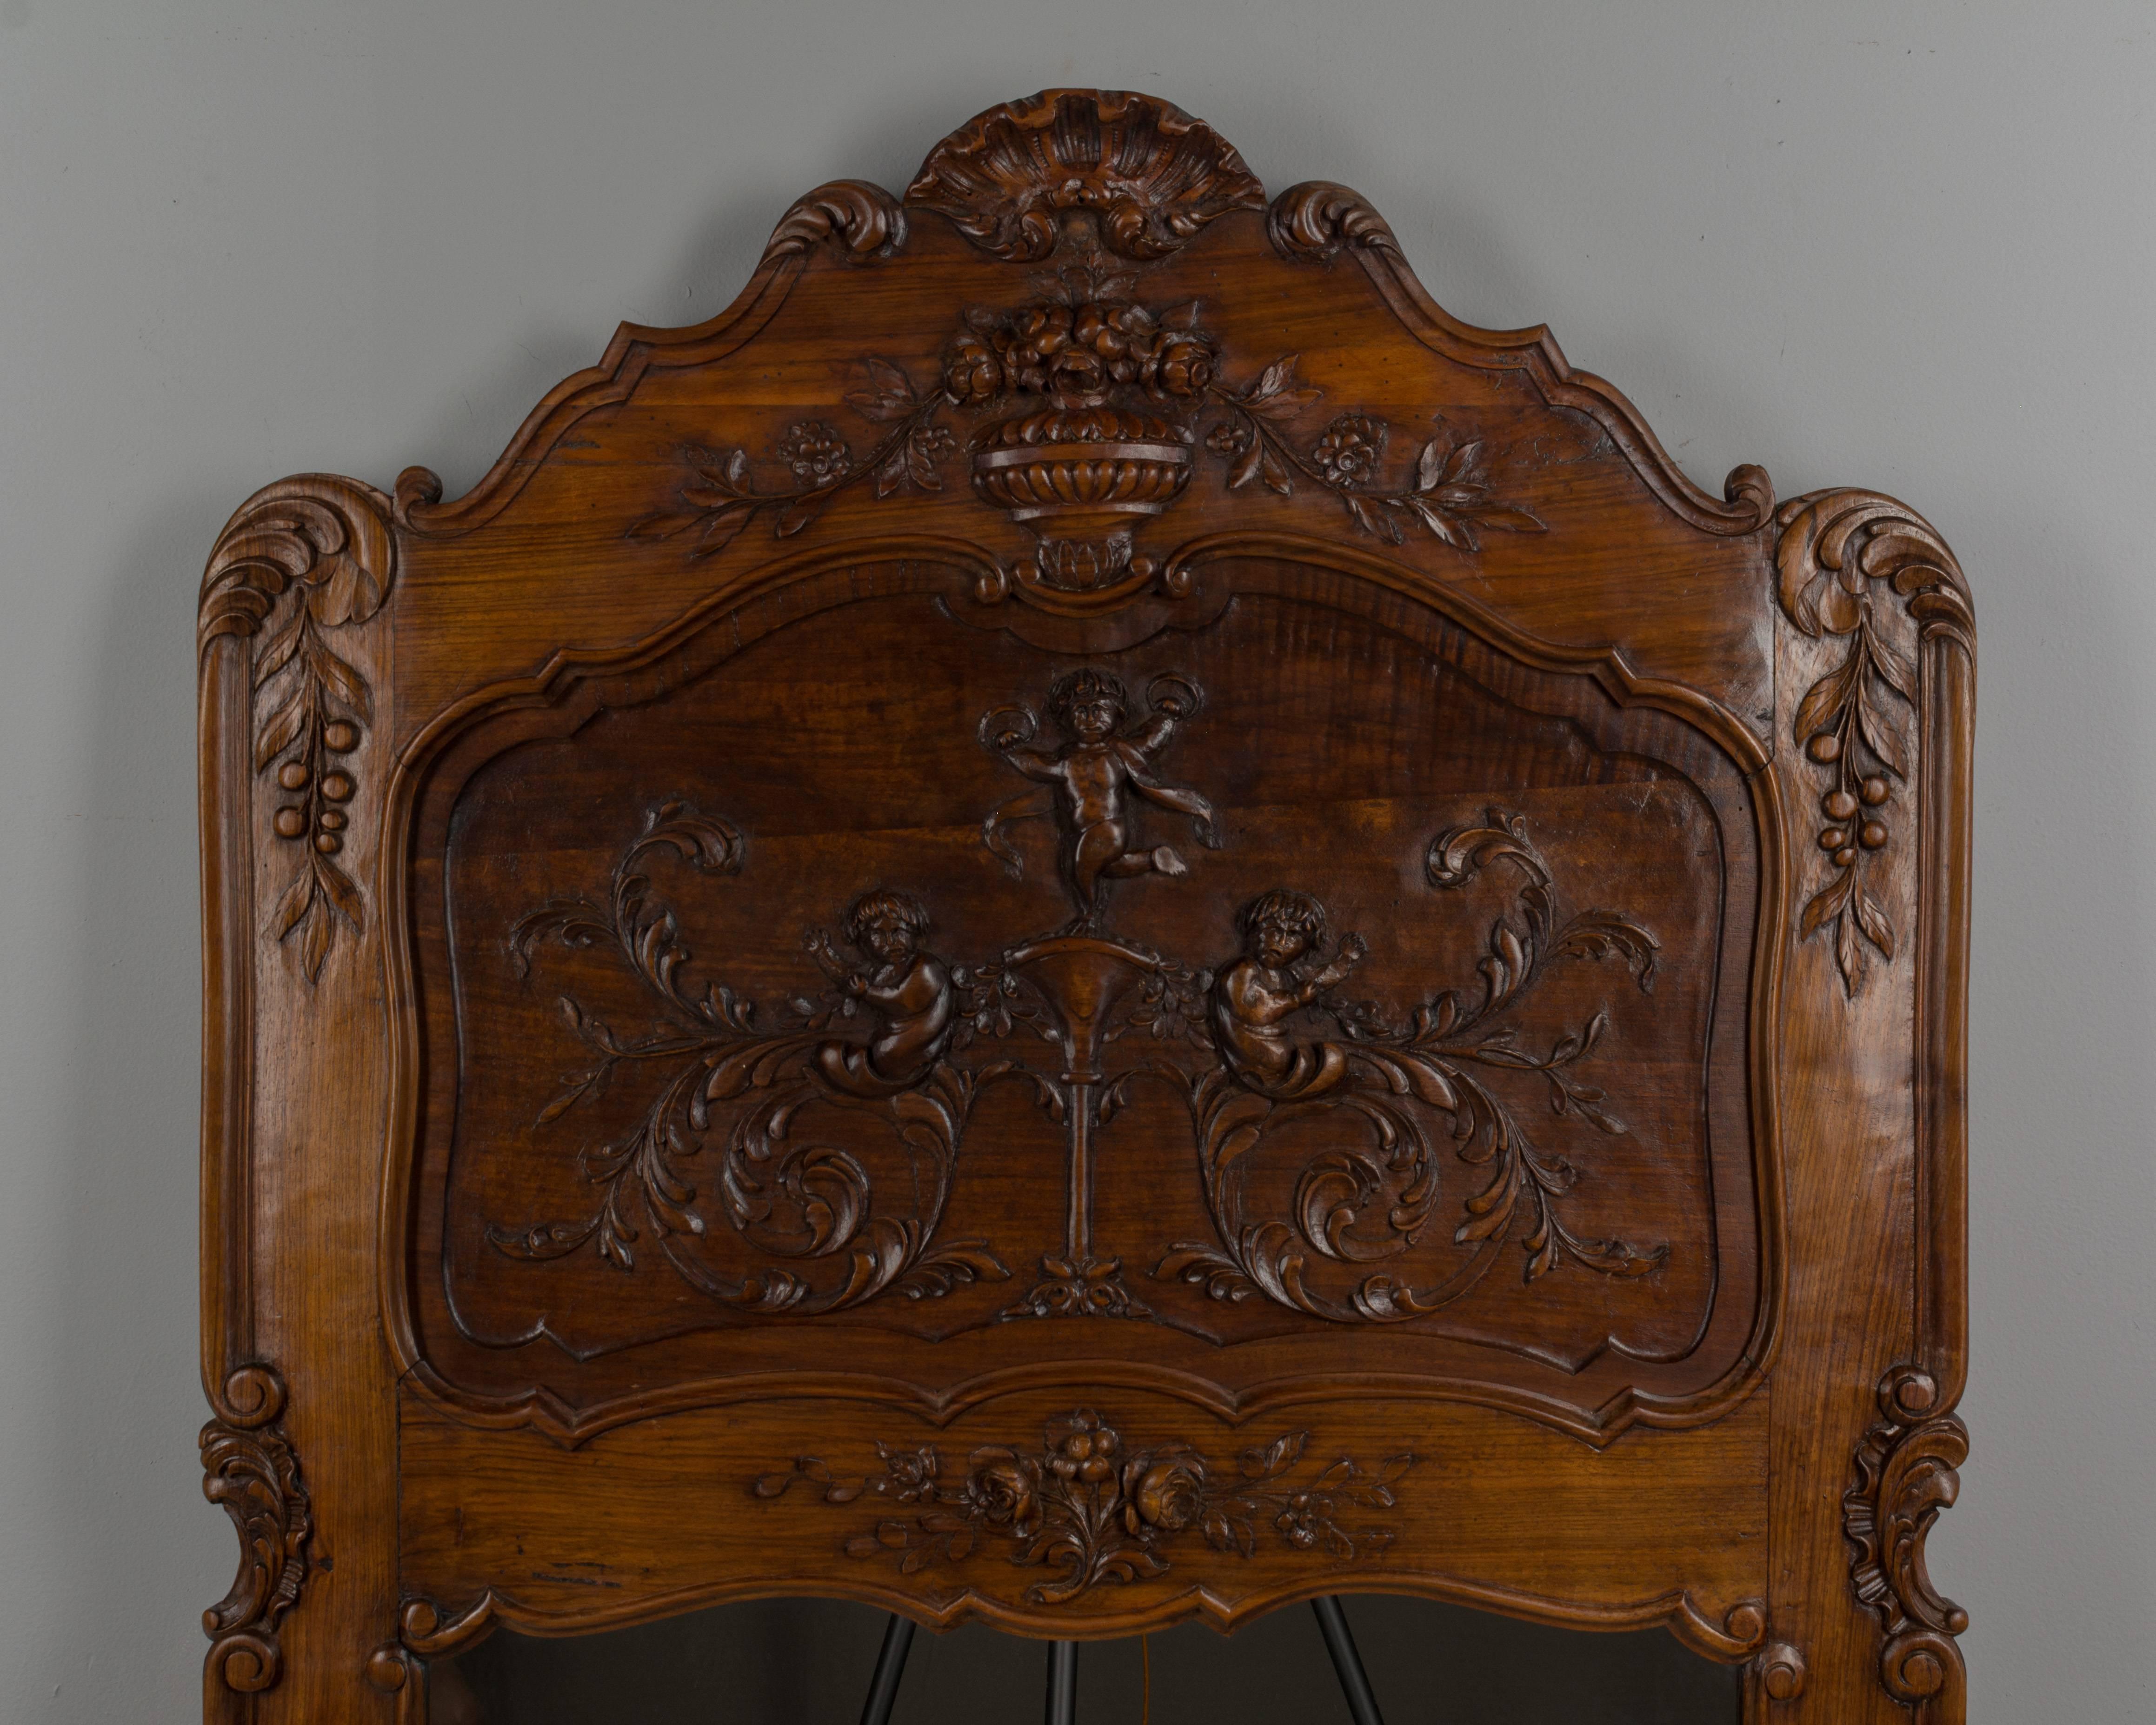 A French Provençal Louis XV Style walnut trumeau mirror with fine hand carvings. All original. Please refer to photos for more details. We have a large selection of French antiques at Olivier Fleury, Inc.  Please visit our showroom in Winter Park,